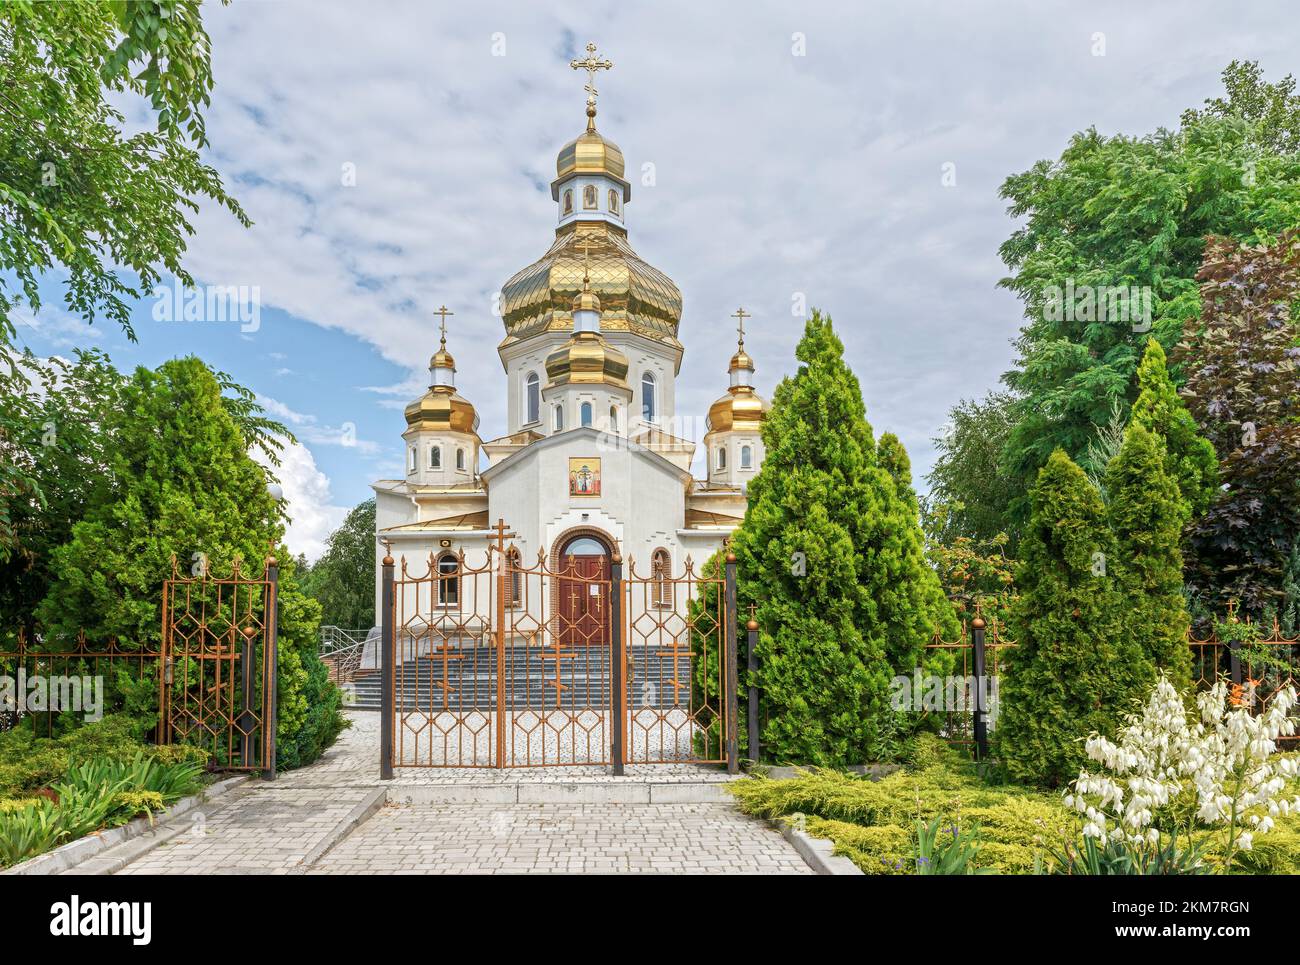 Temple in honor of the Exaltation of the Honorable and Life-Giving Cross of the Lord in Obukhovka, Dnepropetrovsk region, Ukraine. Stock Photo